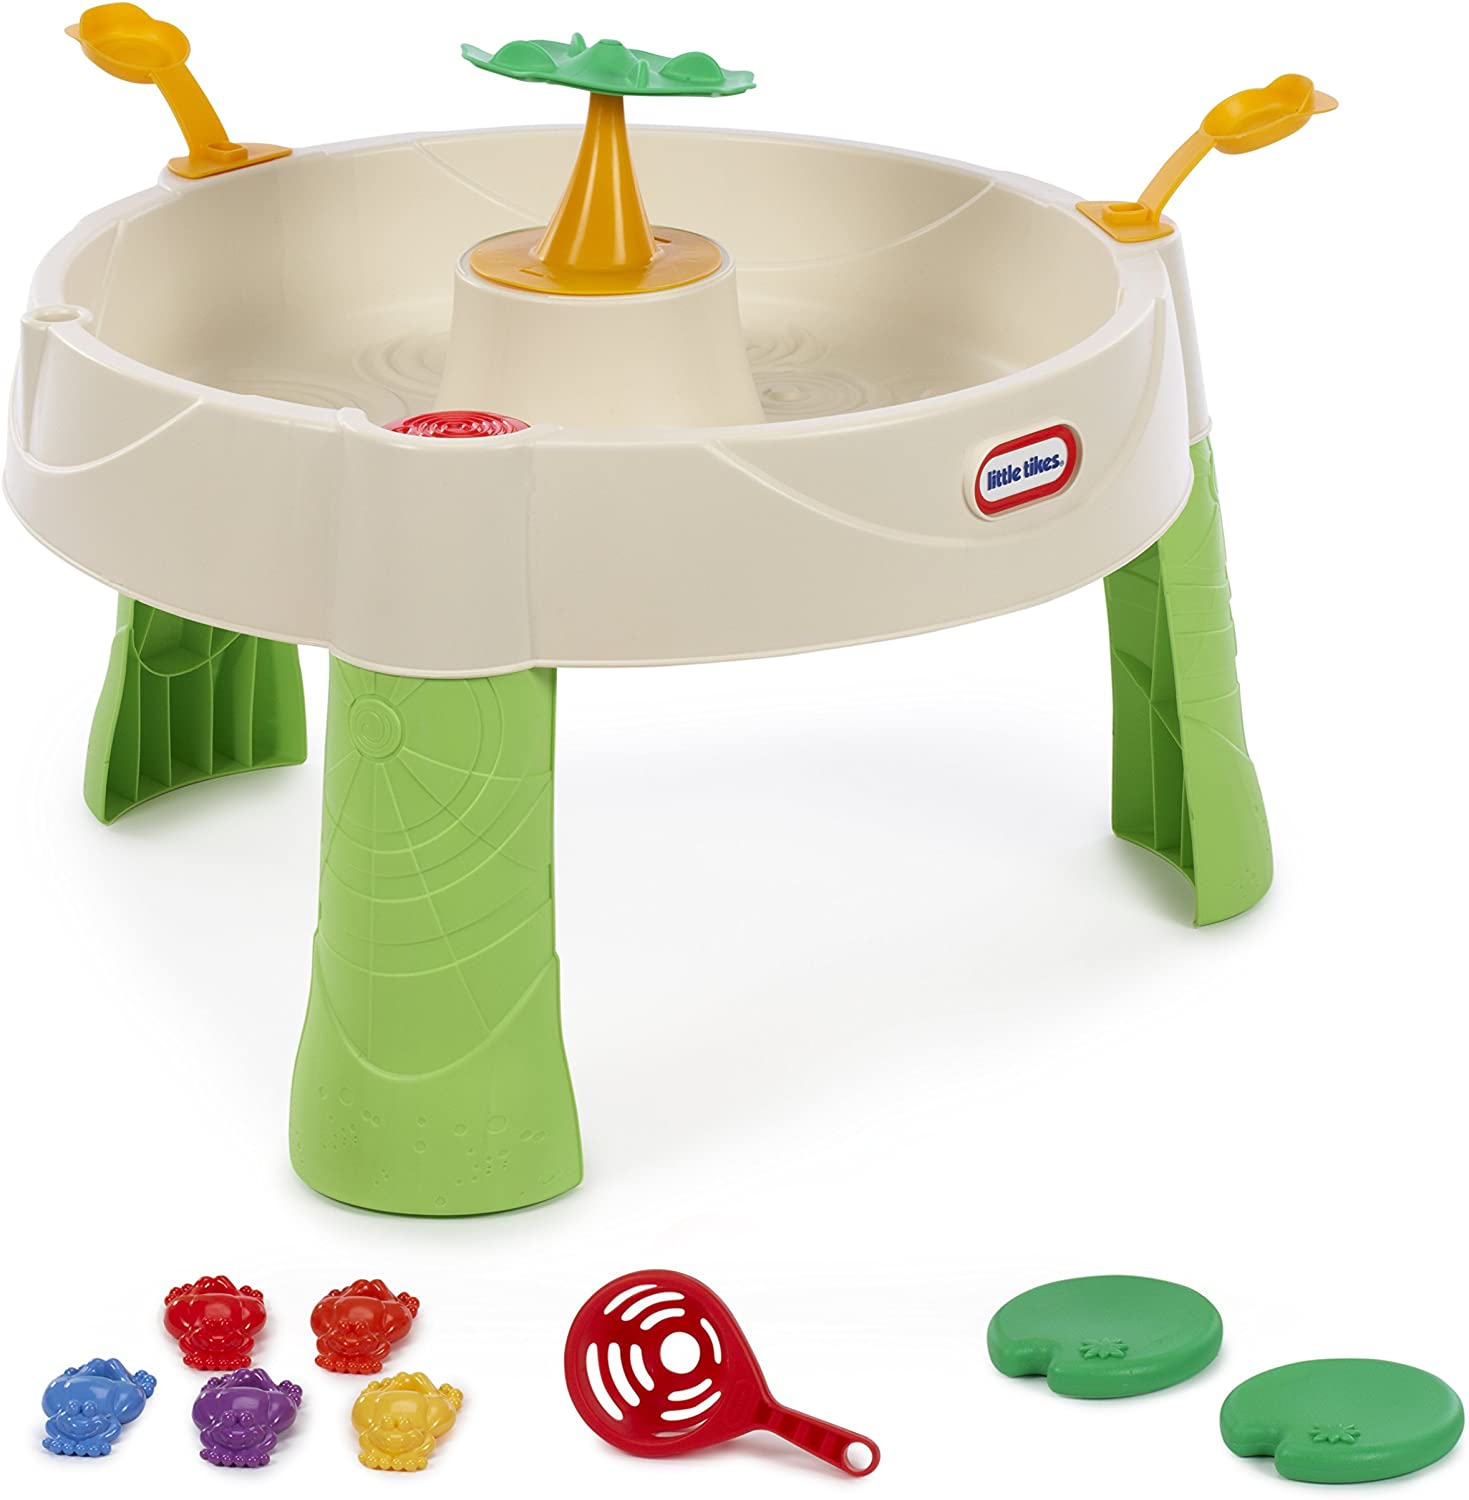 Little Tikes Frog Pond Water Table Flip into fun with the Little Tikes Leaping Frog Water Table